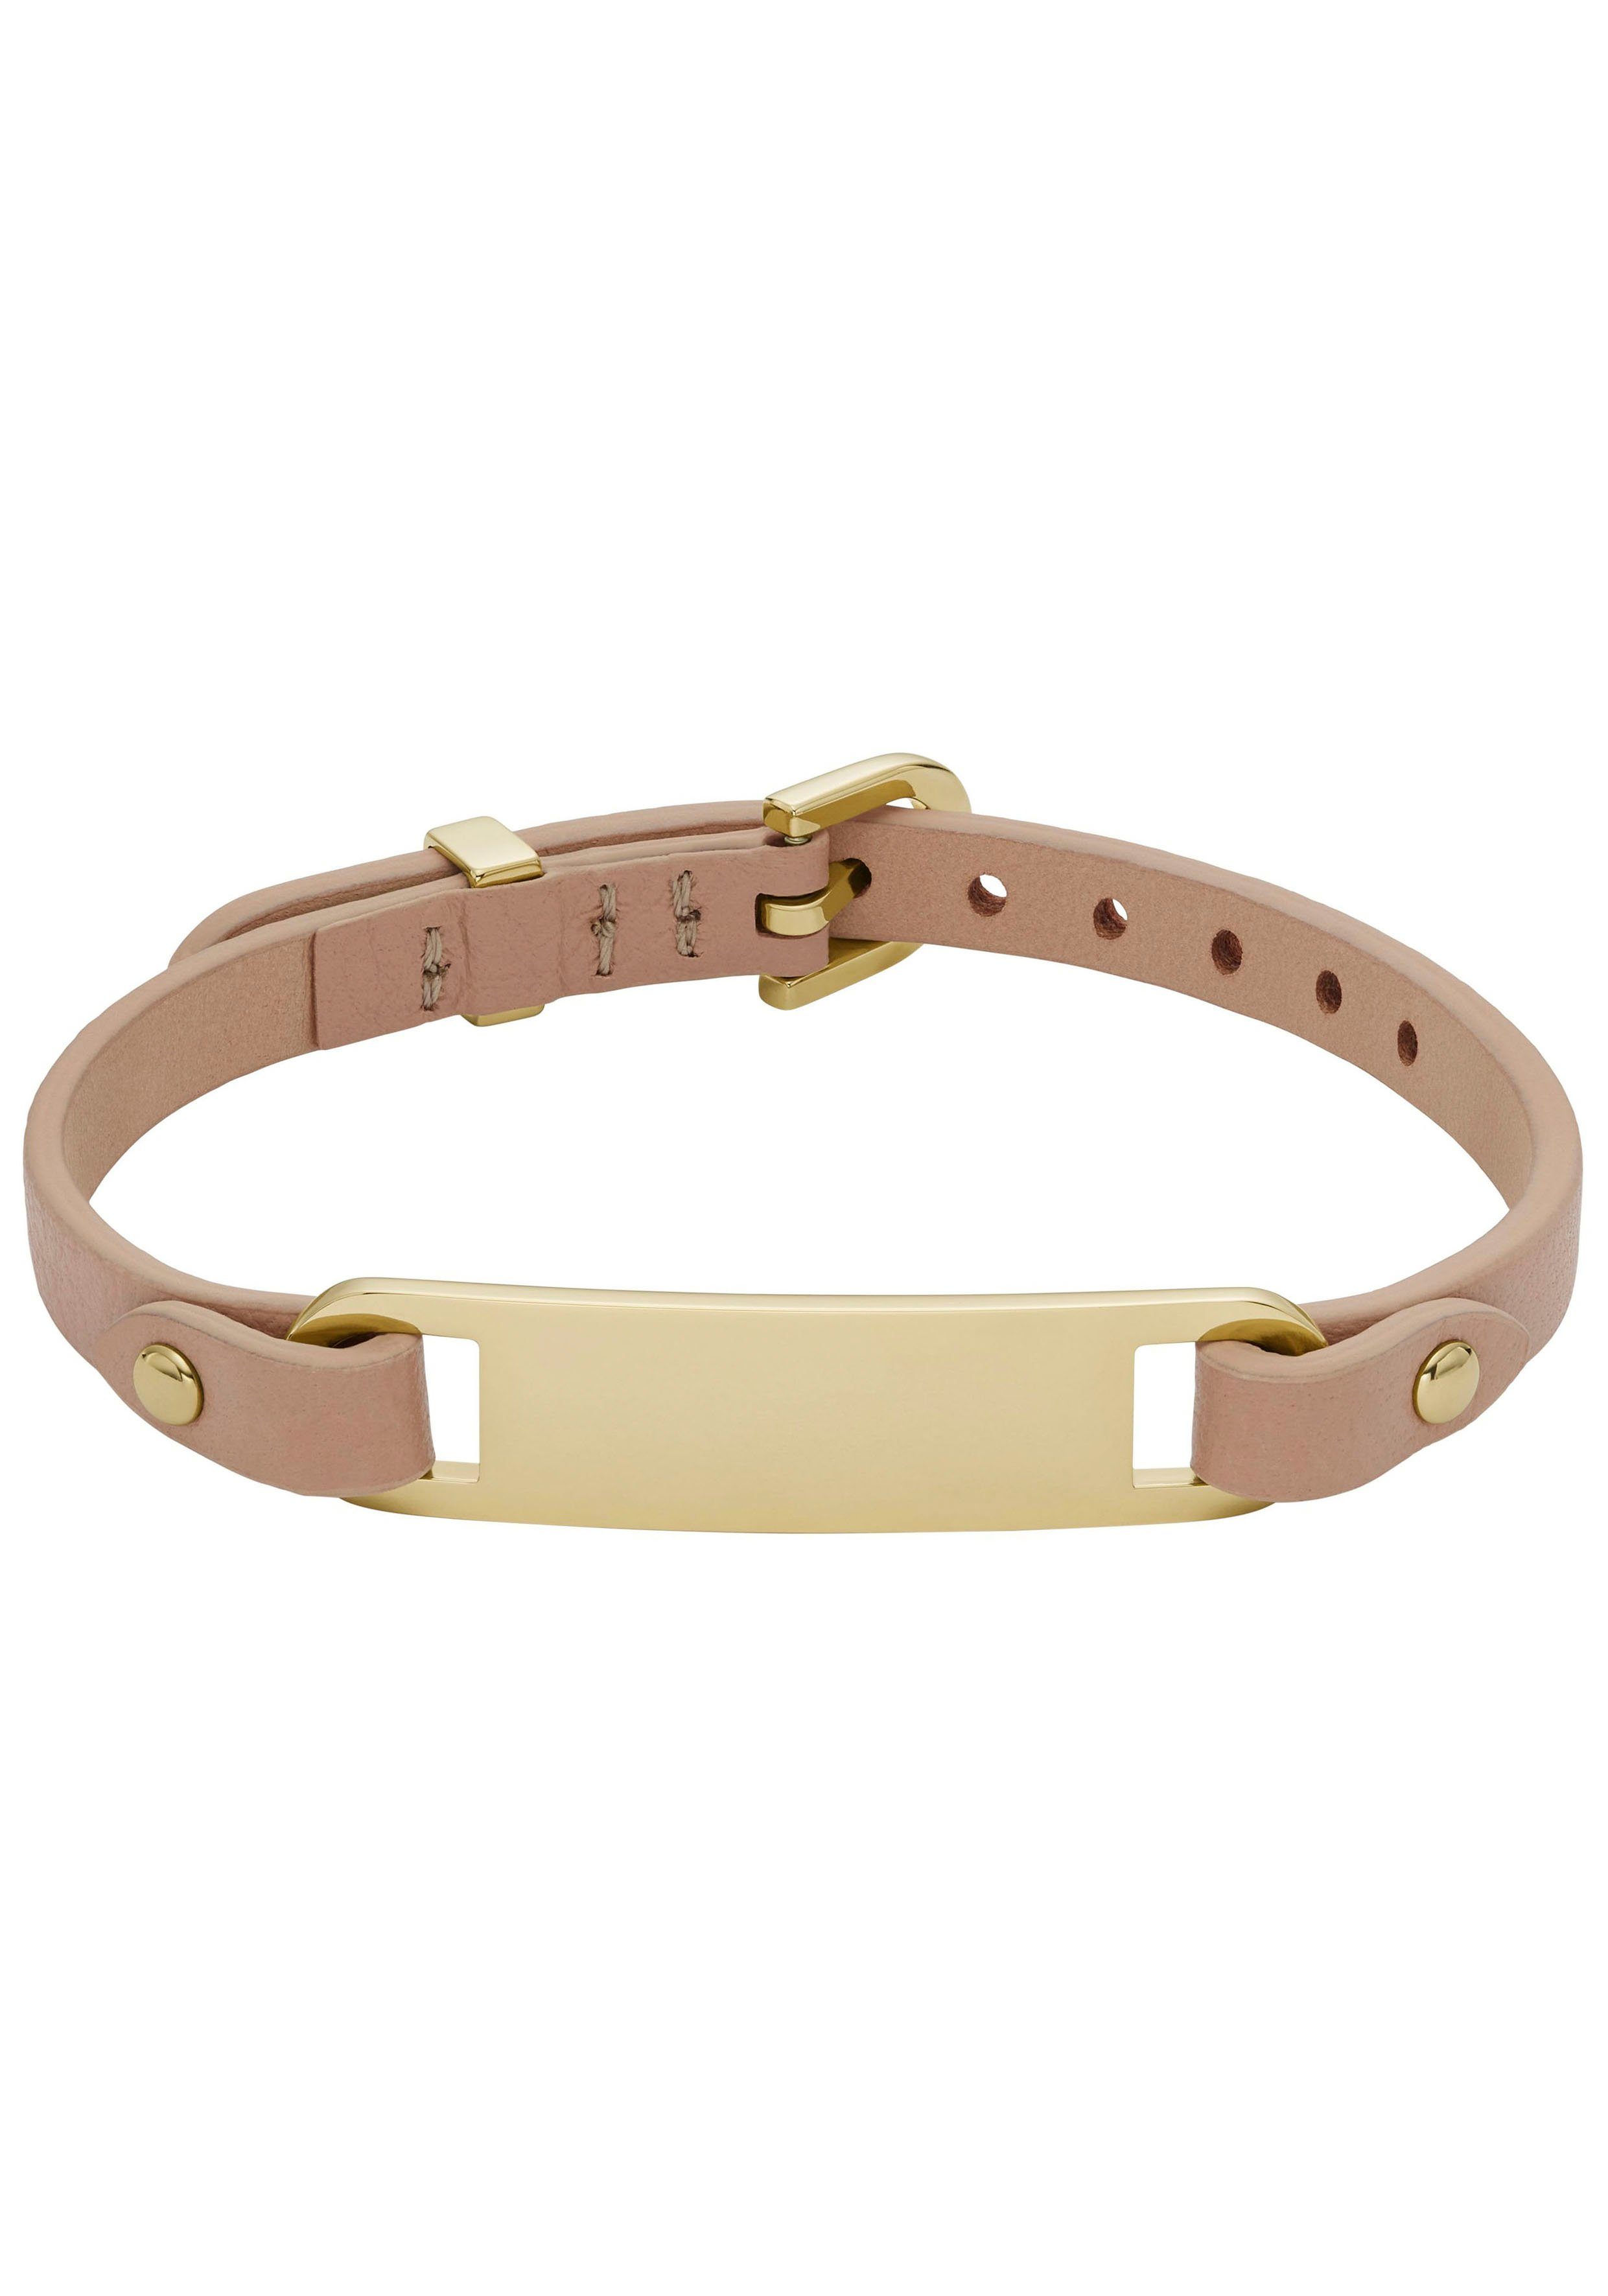 Fossil Armband HERITAGE, JF04433710, JF04434710 gelbgoldfarben-nude